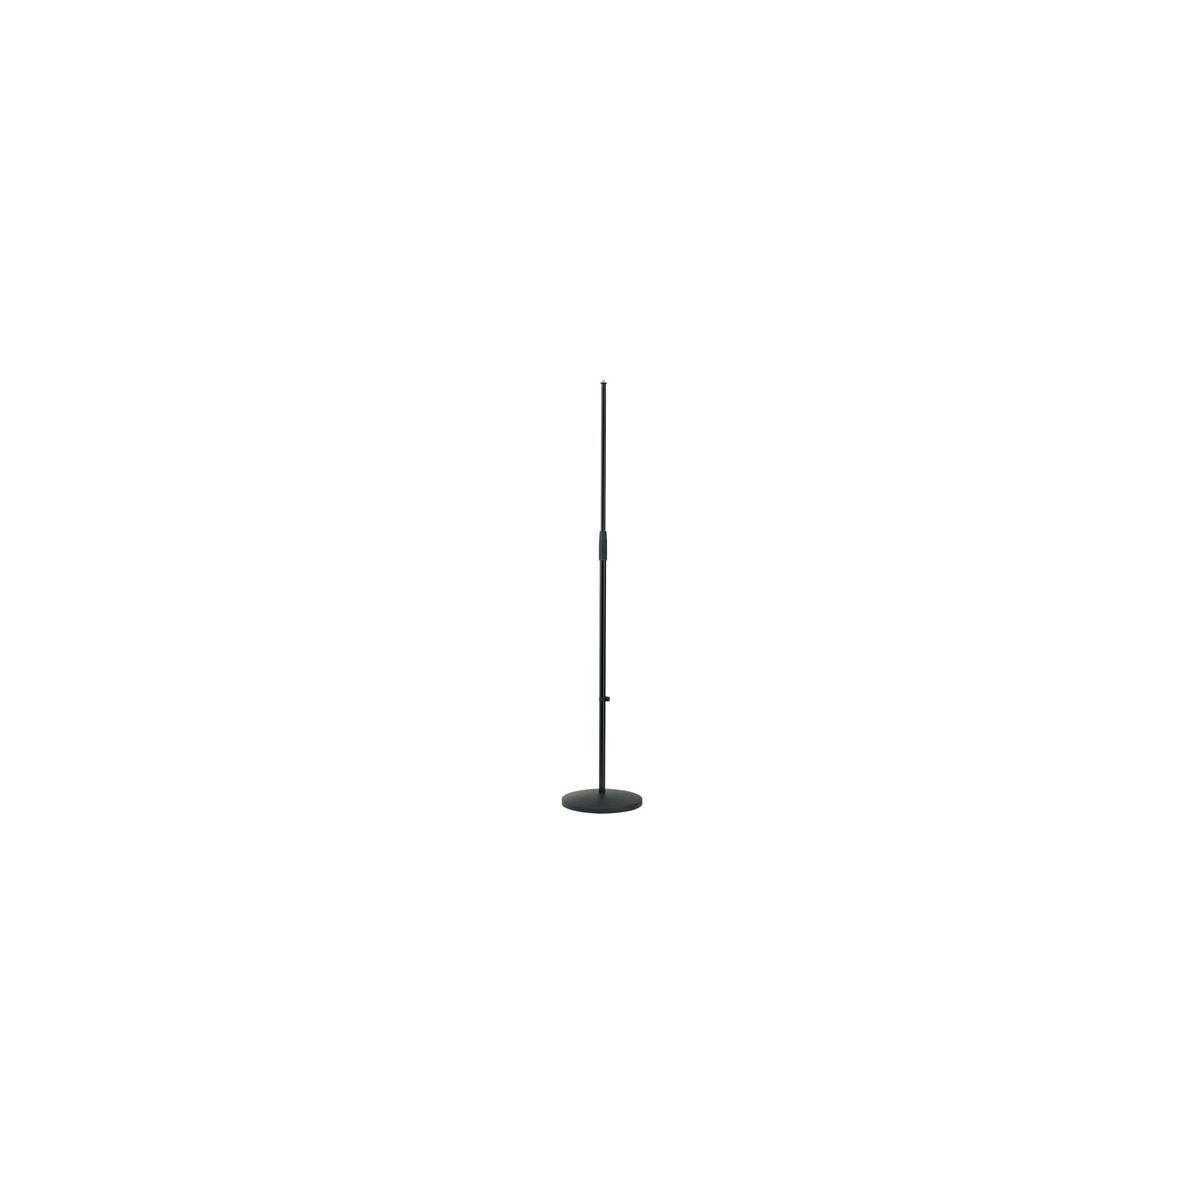 K&M 260/1 One-Hand Adjustable Microphone Stand, 34.3-62" Height, Black -  K&M, 26010.500.55